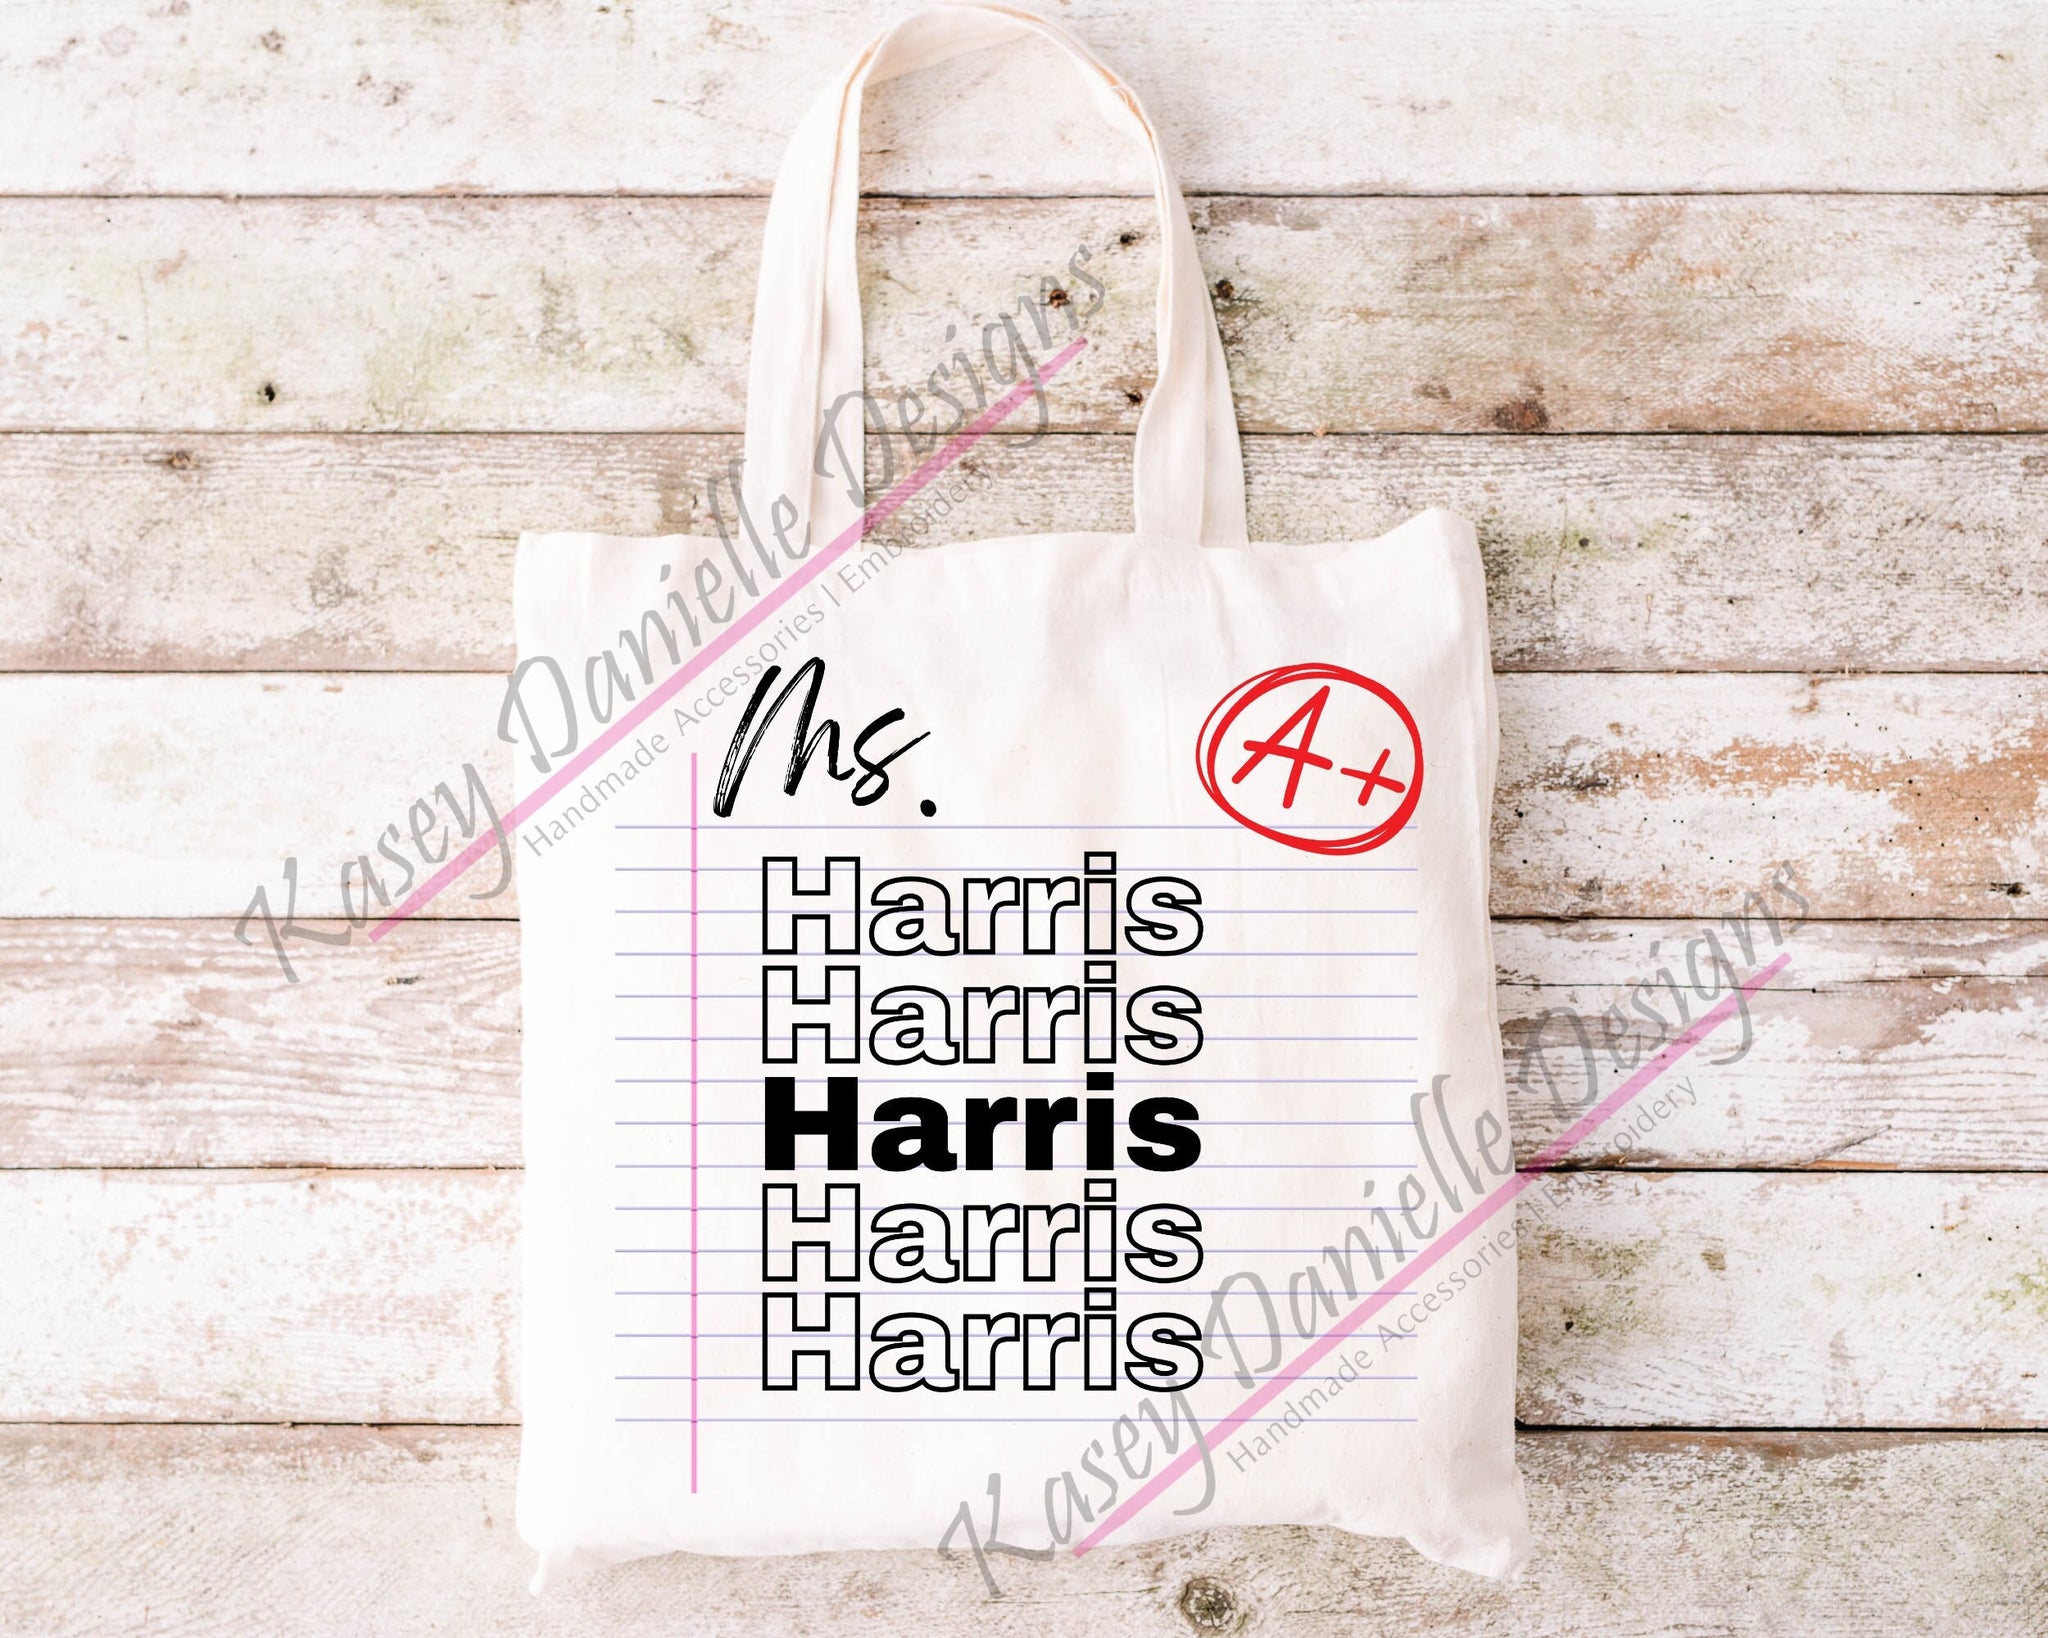 Buy Customized Tote bags With Names